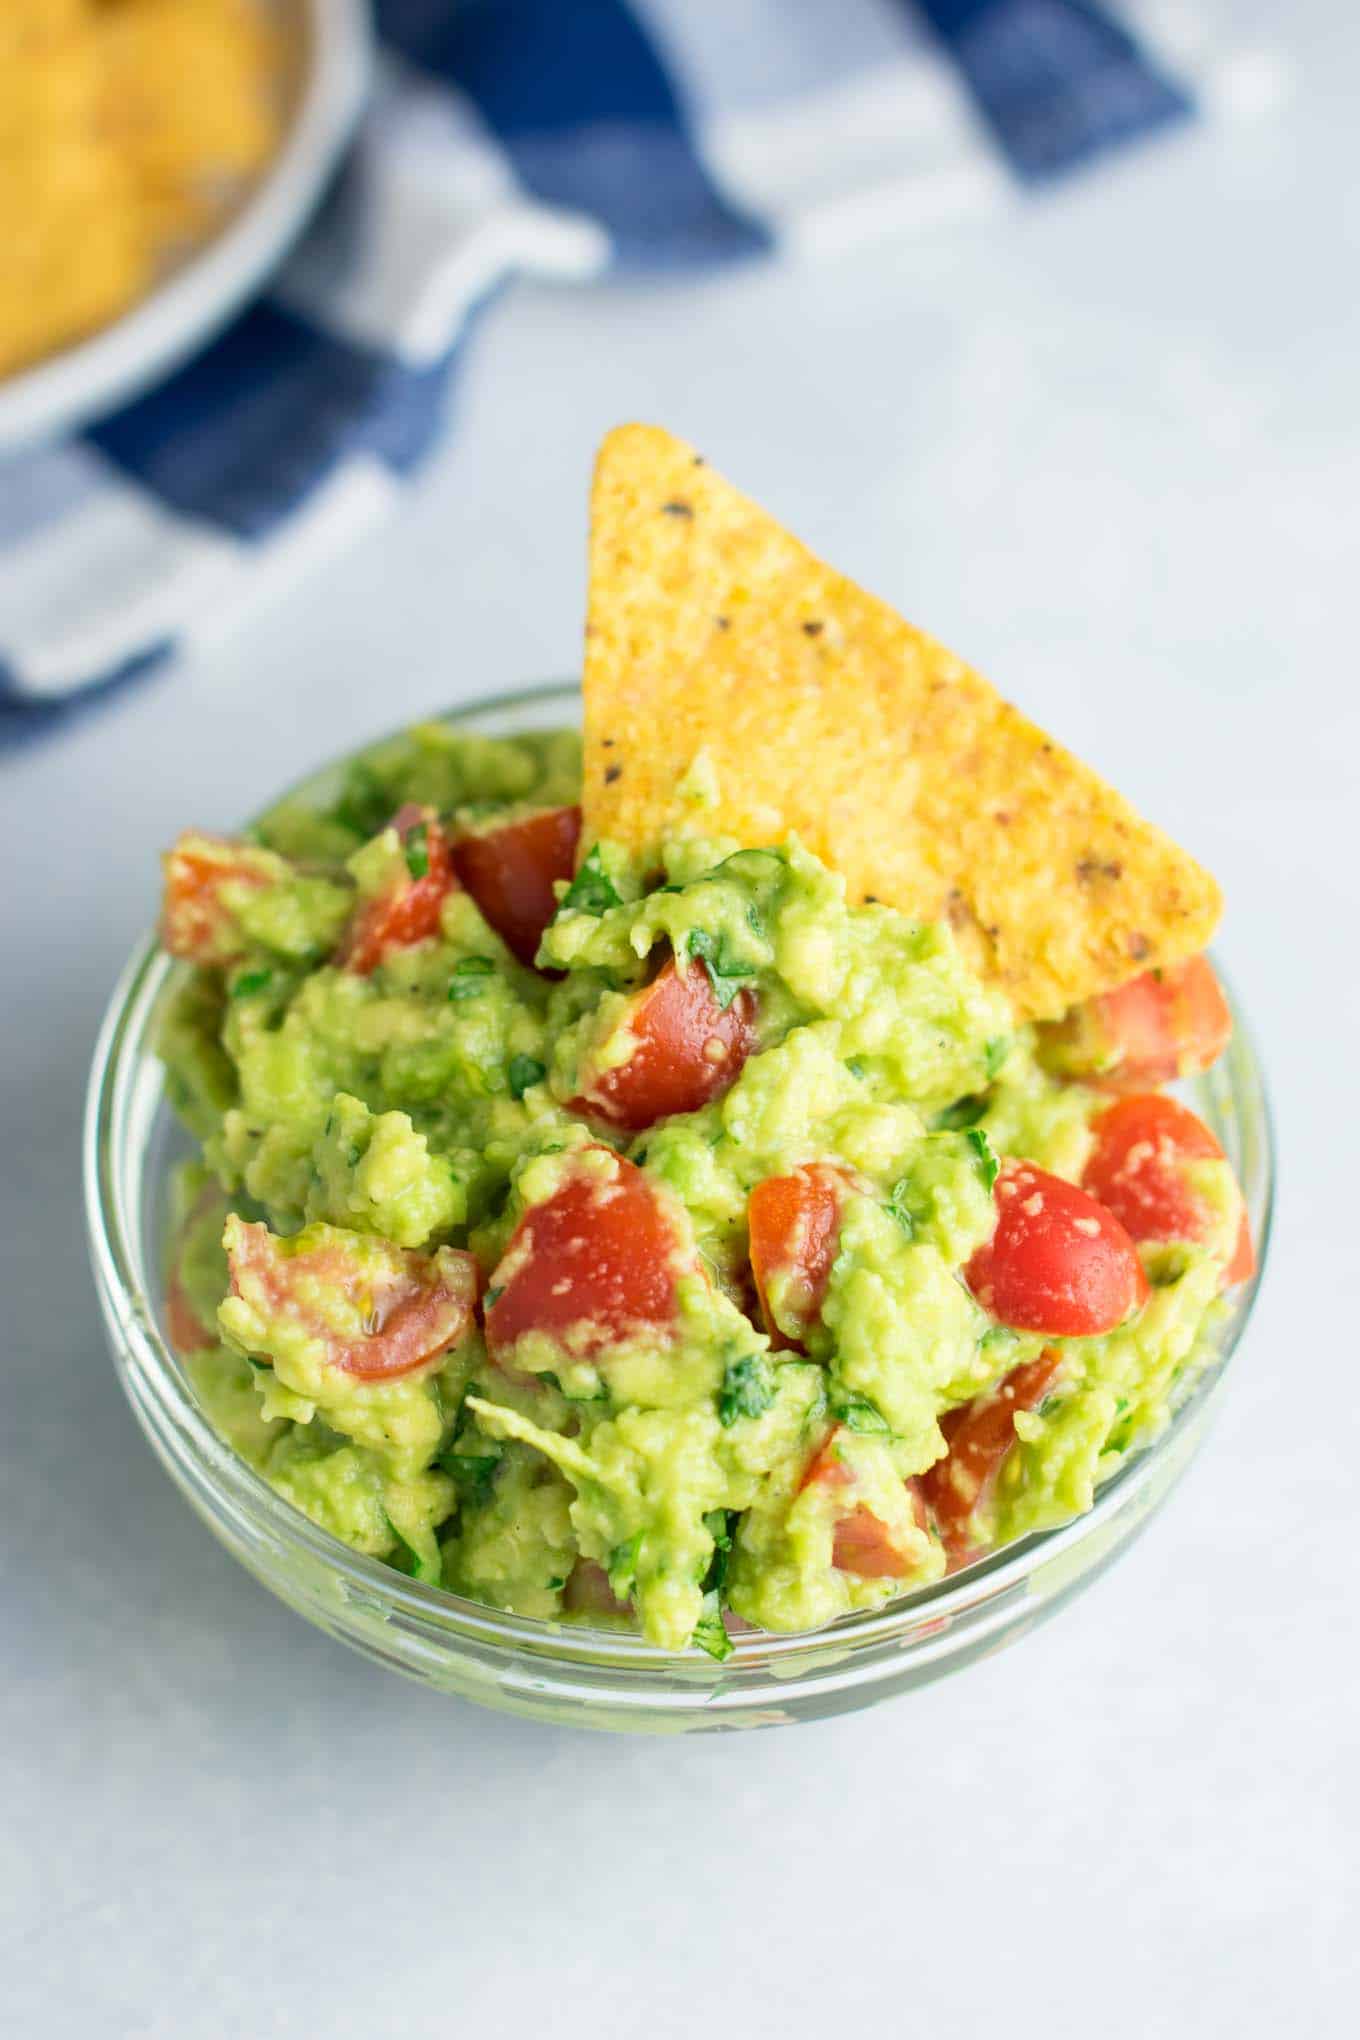 Best Guacamole Recipe - easy and healthy - Build Your Bite